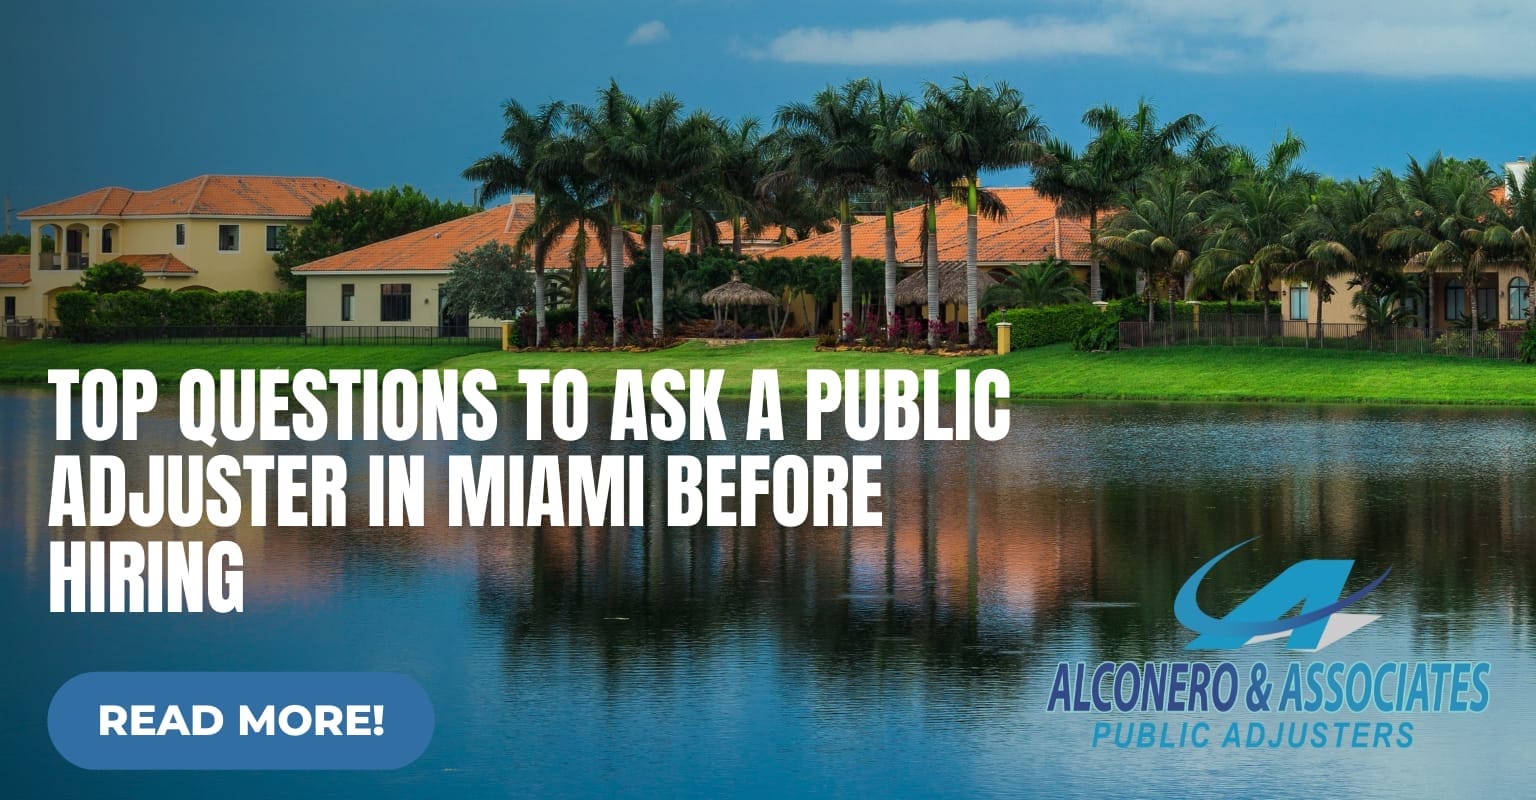 Top Questions to Ask a Public Adjuster in Miami Before Hiring